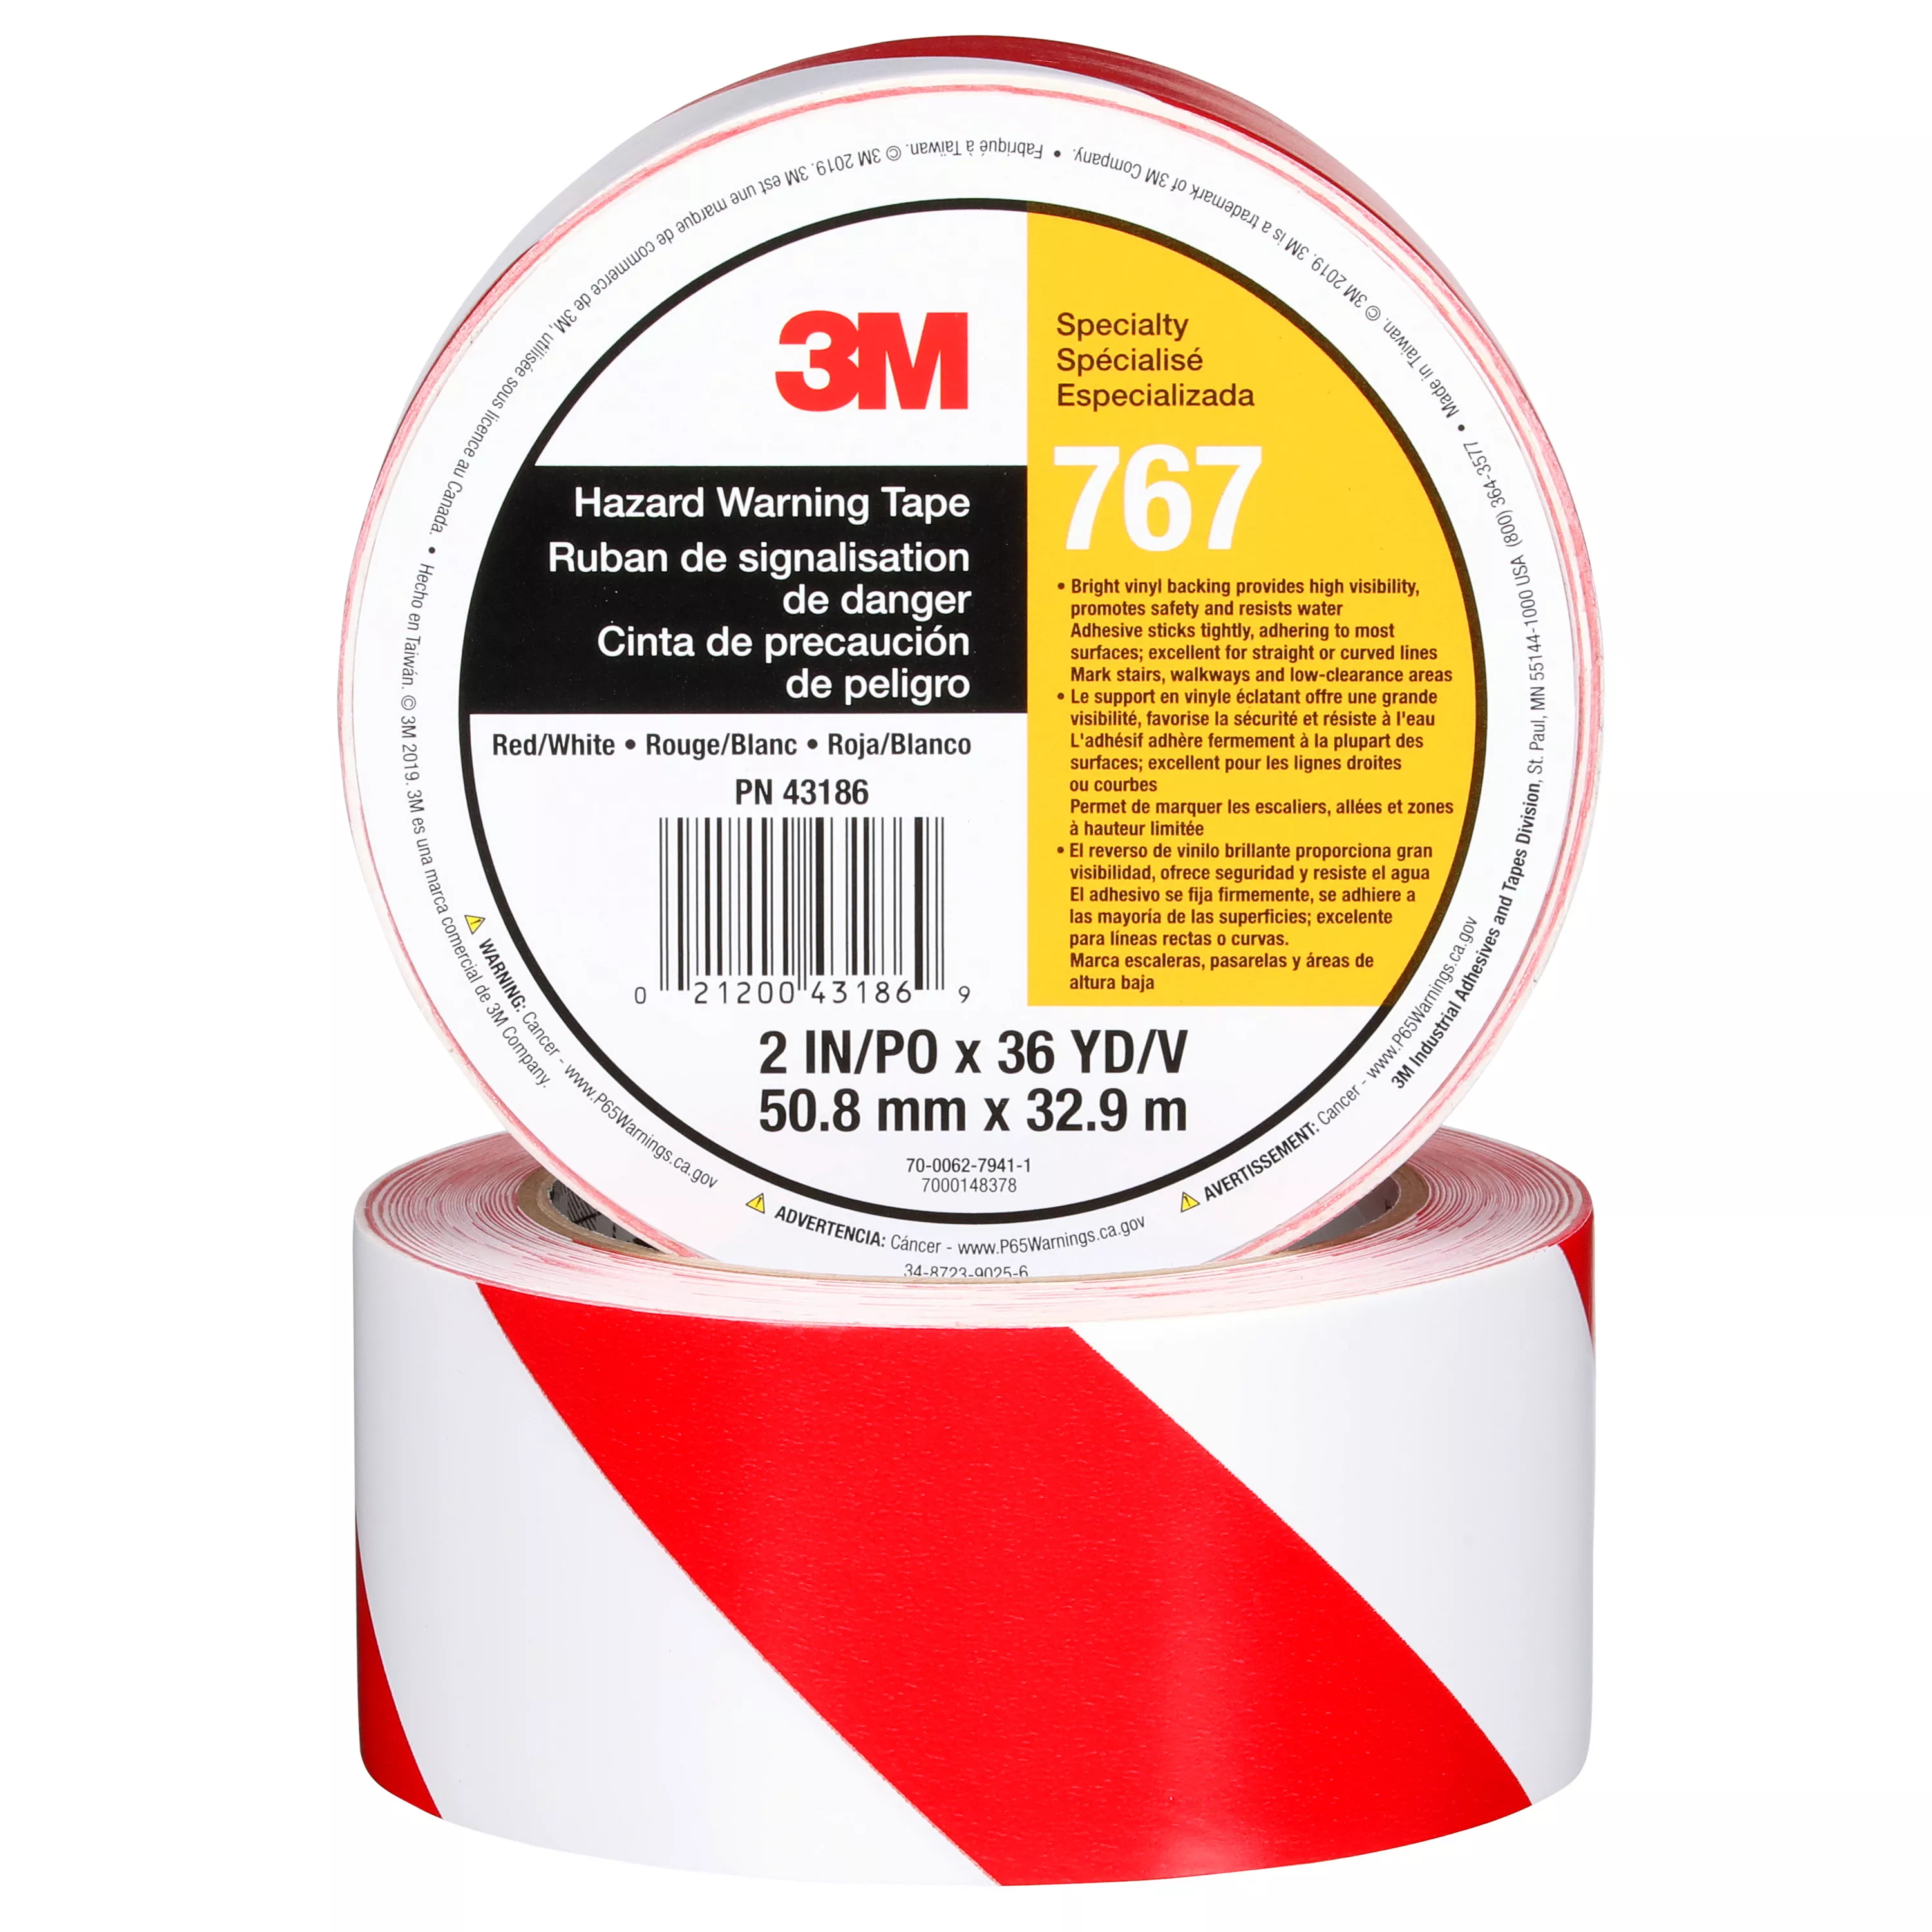 3M™ Safety Stripe Vinyl Tape 767, Red/White, 2 in x 36 yd, 5 mil, 24
Roll/Case, Individually Wrapped Conveniently Packaged